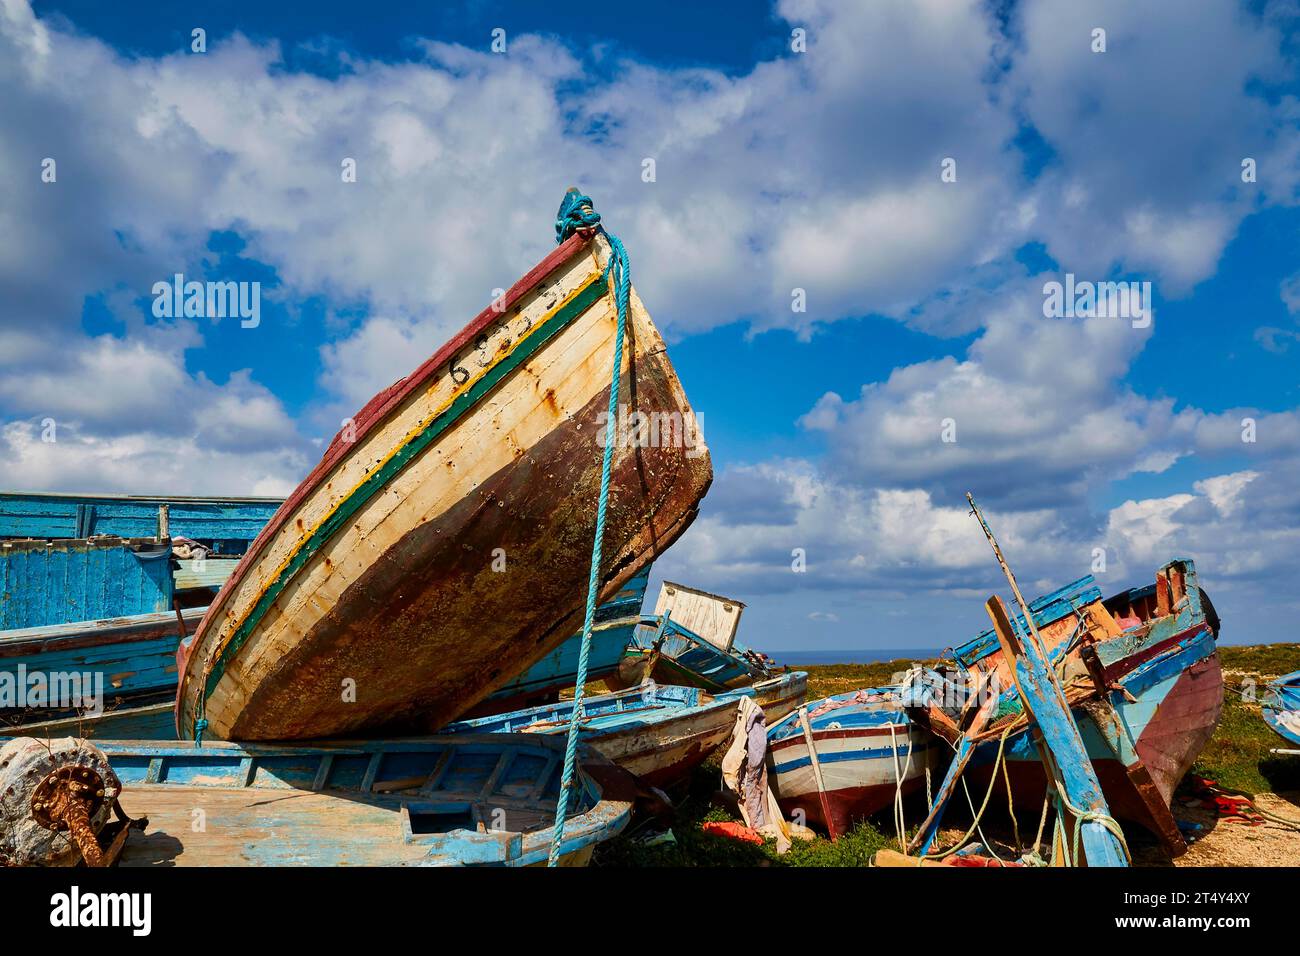 Boat reaching into the sky, refugee boats, Cimitero delle barche, boat graveyard, boat wrecks, blue cloudy dramatic sky, Lampedusa Island, Agrigento Stock Photo